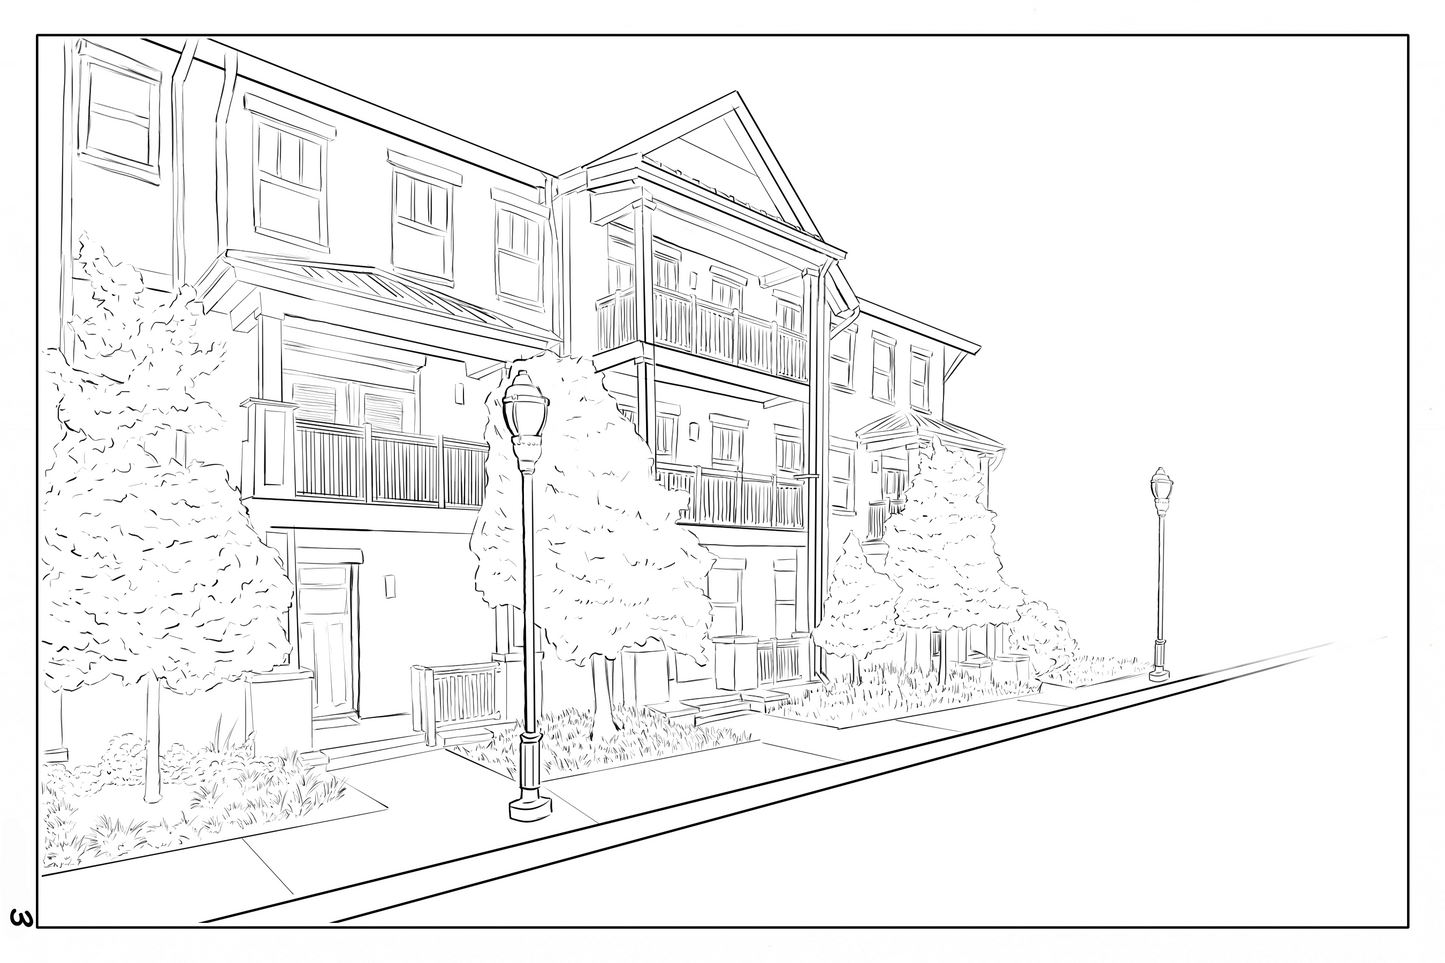 Downtown Chattanooga Cherry street apartments watercolor coloring book page, 140lbs cold pressed watercolor paper